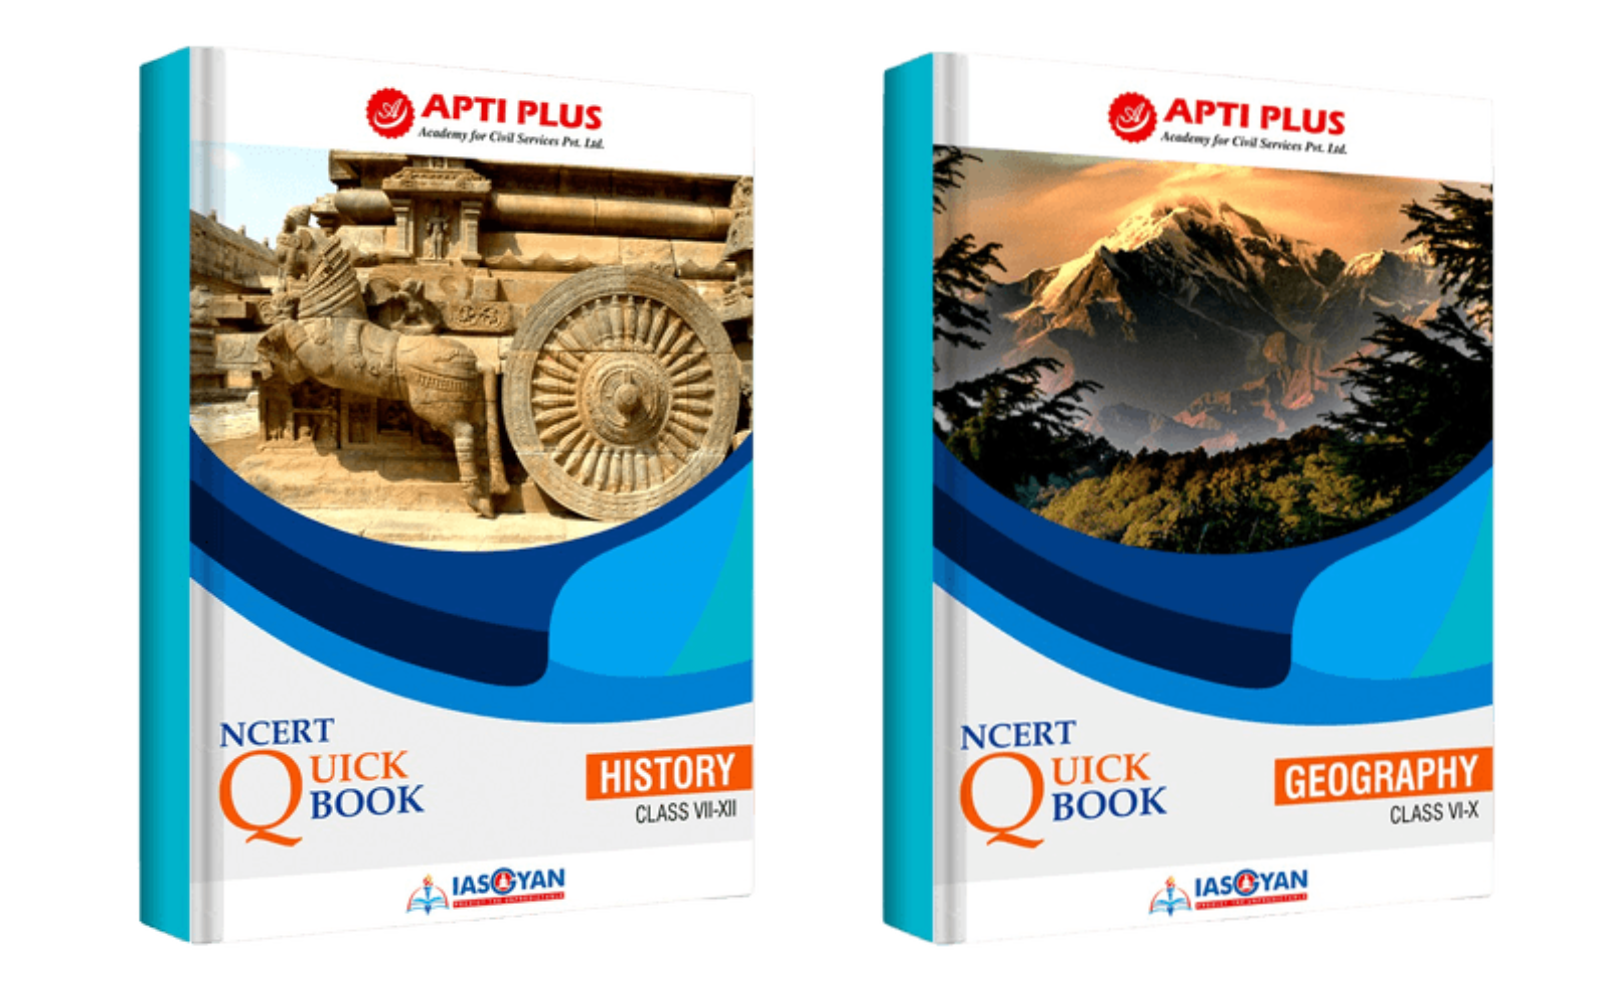 NCERT Quick Books: Geography & History